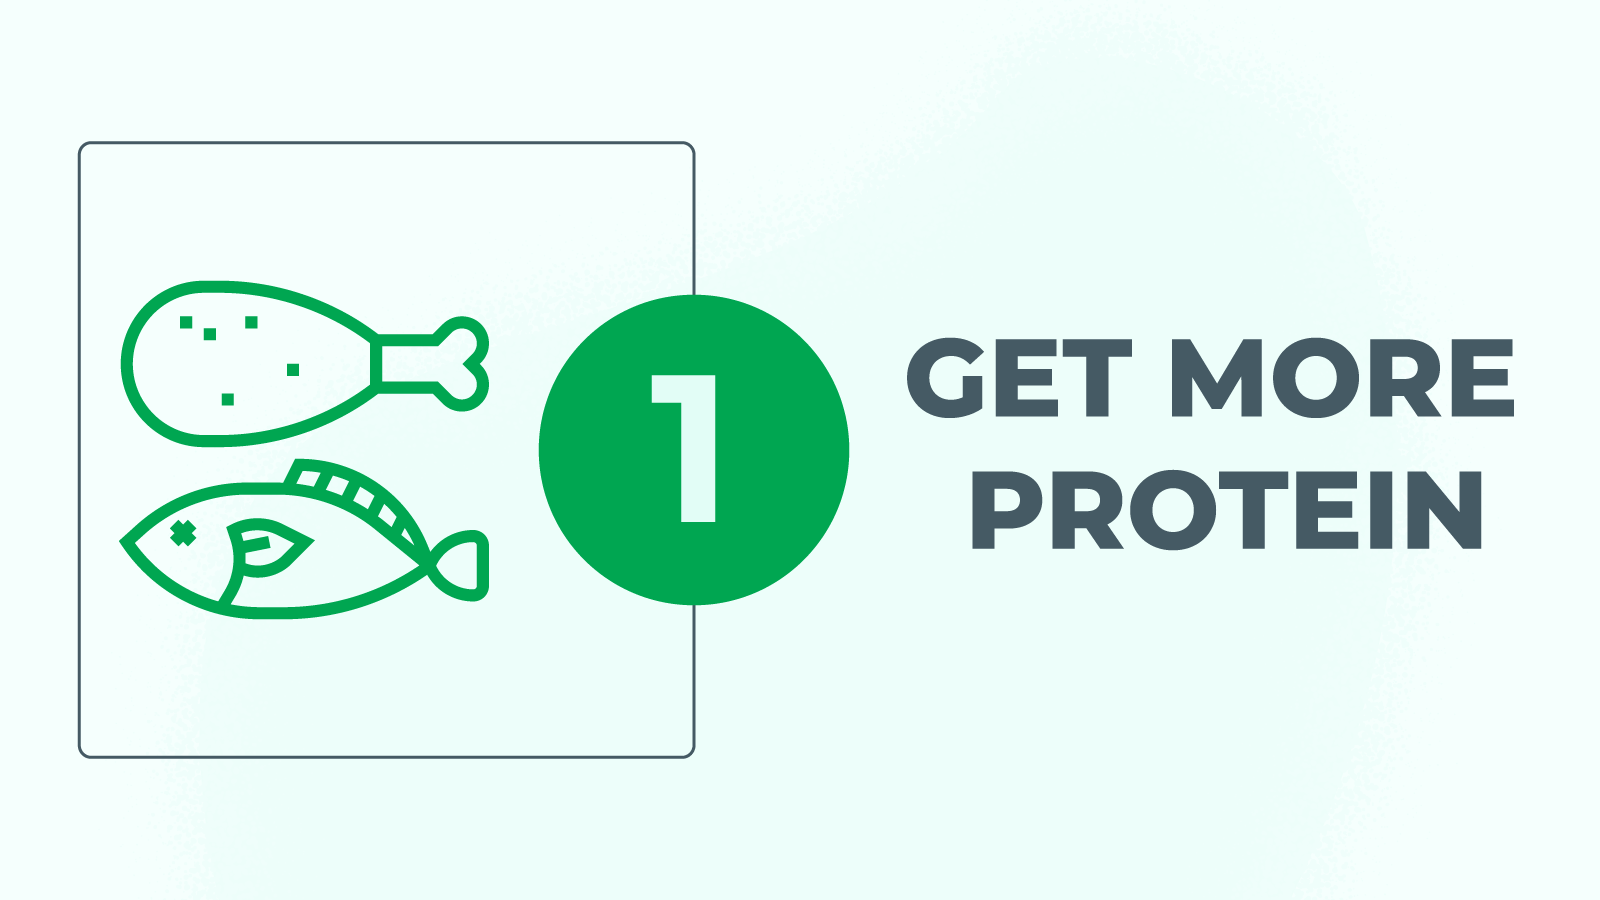 Get more protein - stop gambling addiction